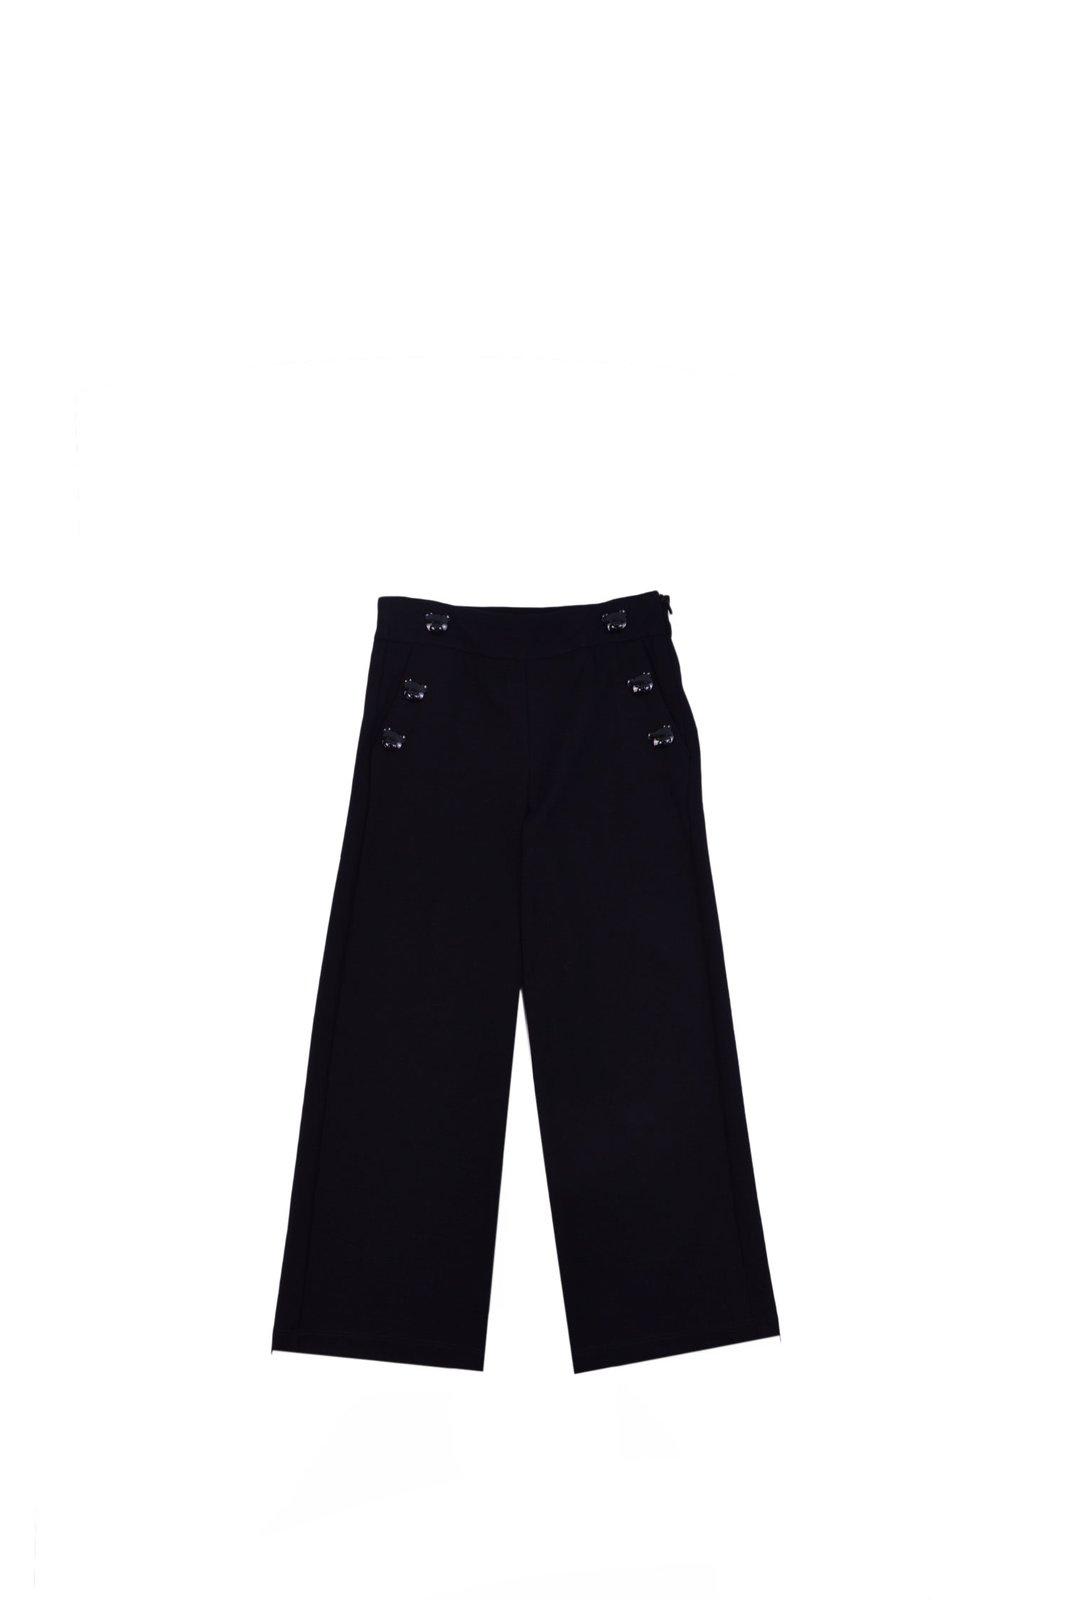 Moschino Kids' Button-detailed Straight-leg Trousers In Nero Black